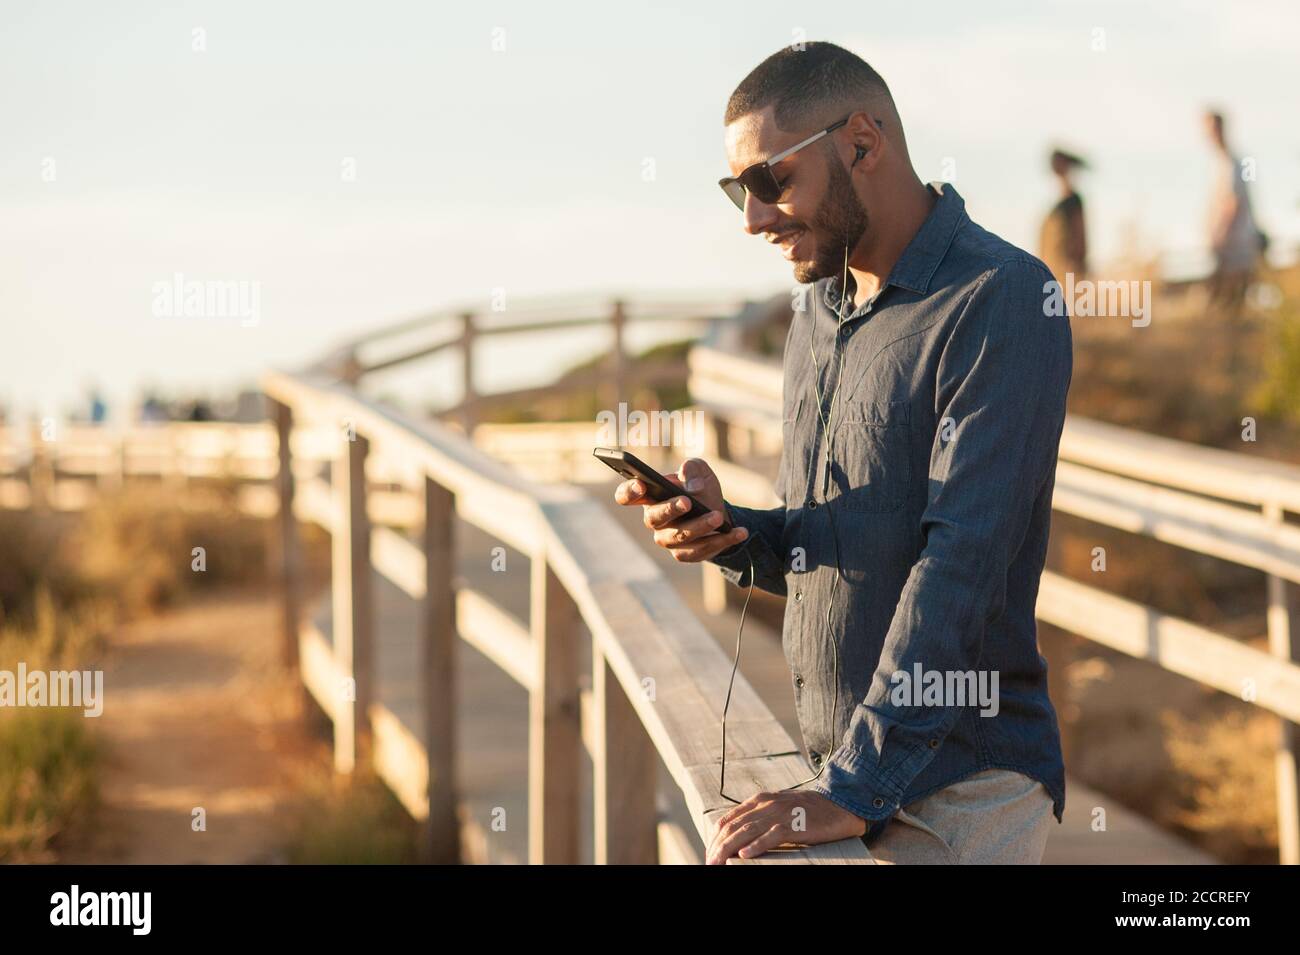 Latin man texting with a smartphone over an amazing sunset landscape view. Natural  outdoor light Stock Photo